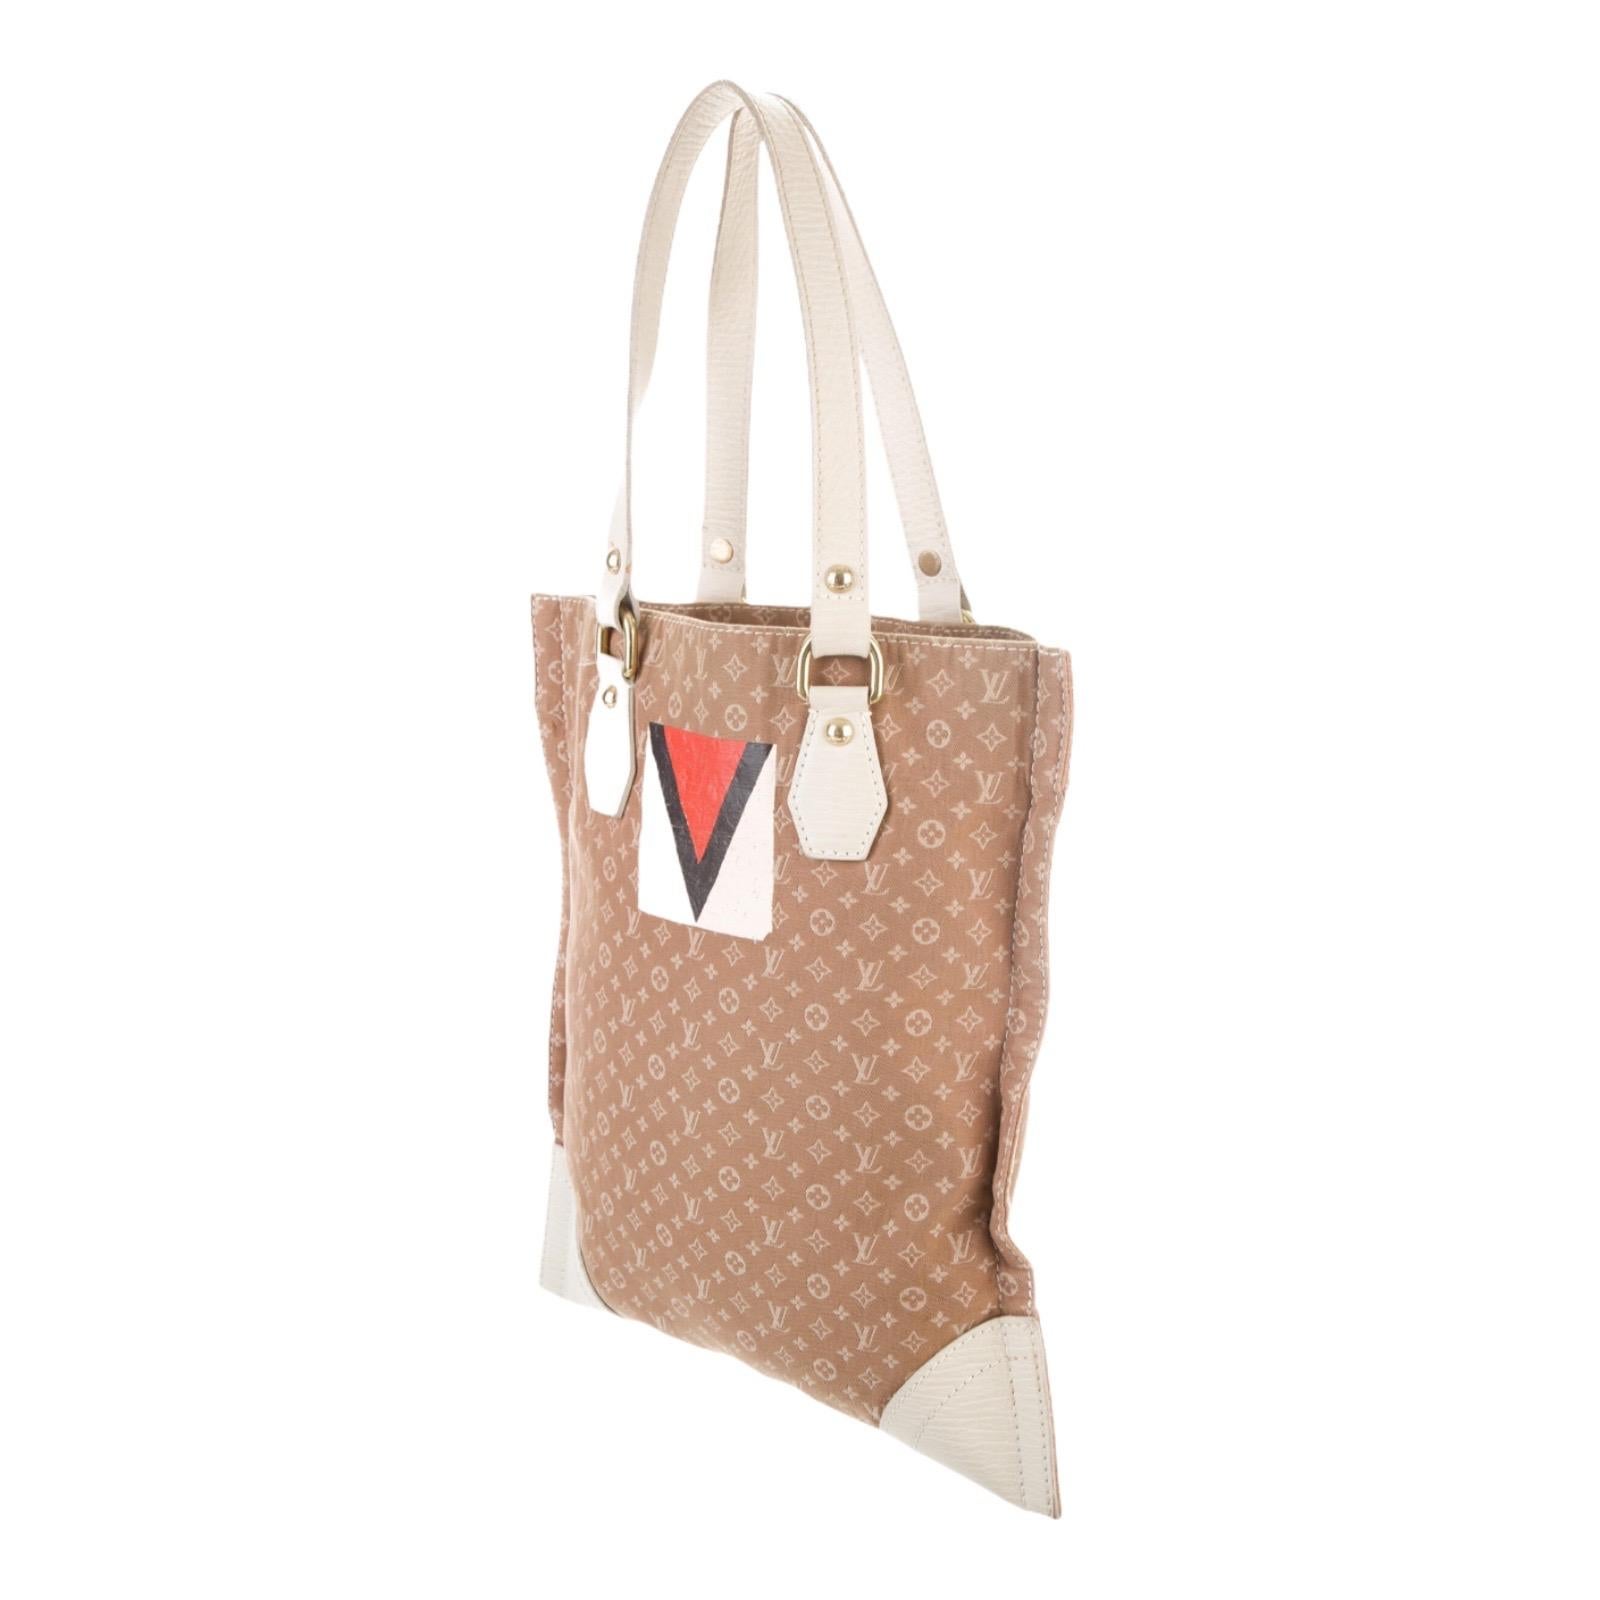 An extraordinary piece for every Louis Vuitton lover!

This Louis Vuitton Monogram bag reminds of vacations spent in the beautiful areas of Nantucket, Cape Cod and of course the Hamptons with sail boat rides, picnics on the beach, tea time and